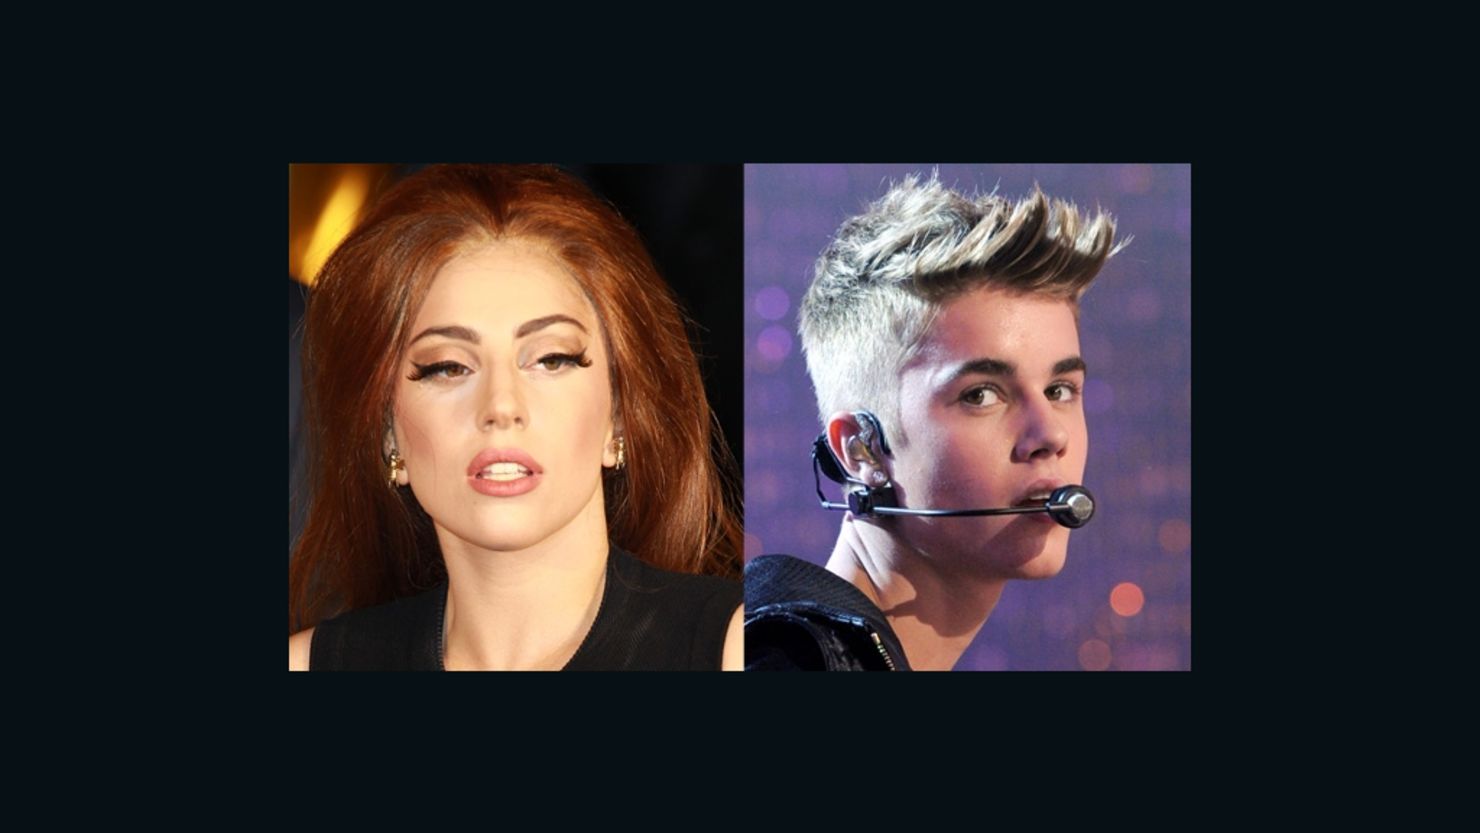 On Monday night, Lady Gaga was surpassed by Justin Bieber as the most followed person on Twitter.